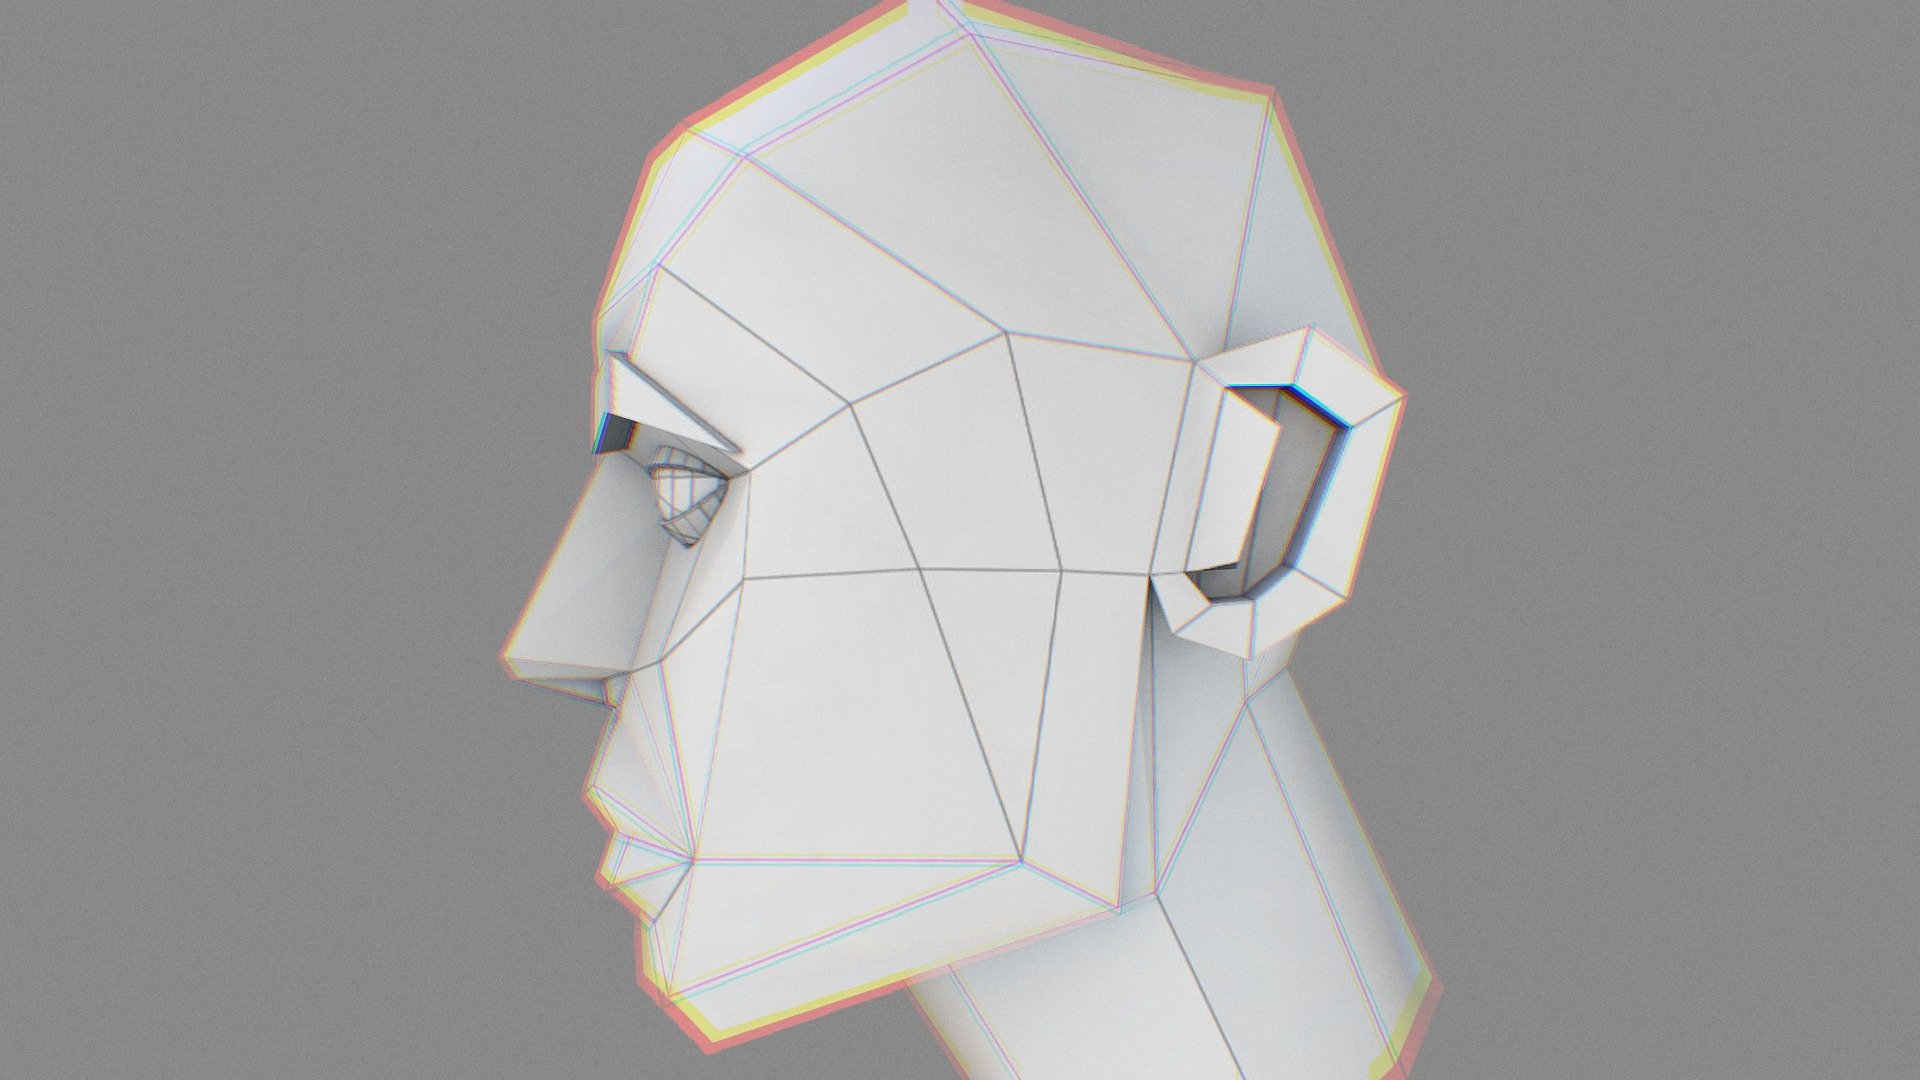 Low Poly Head